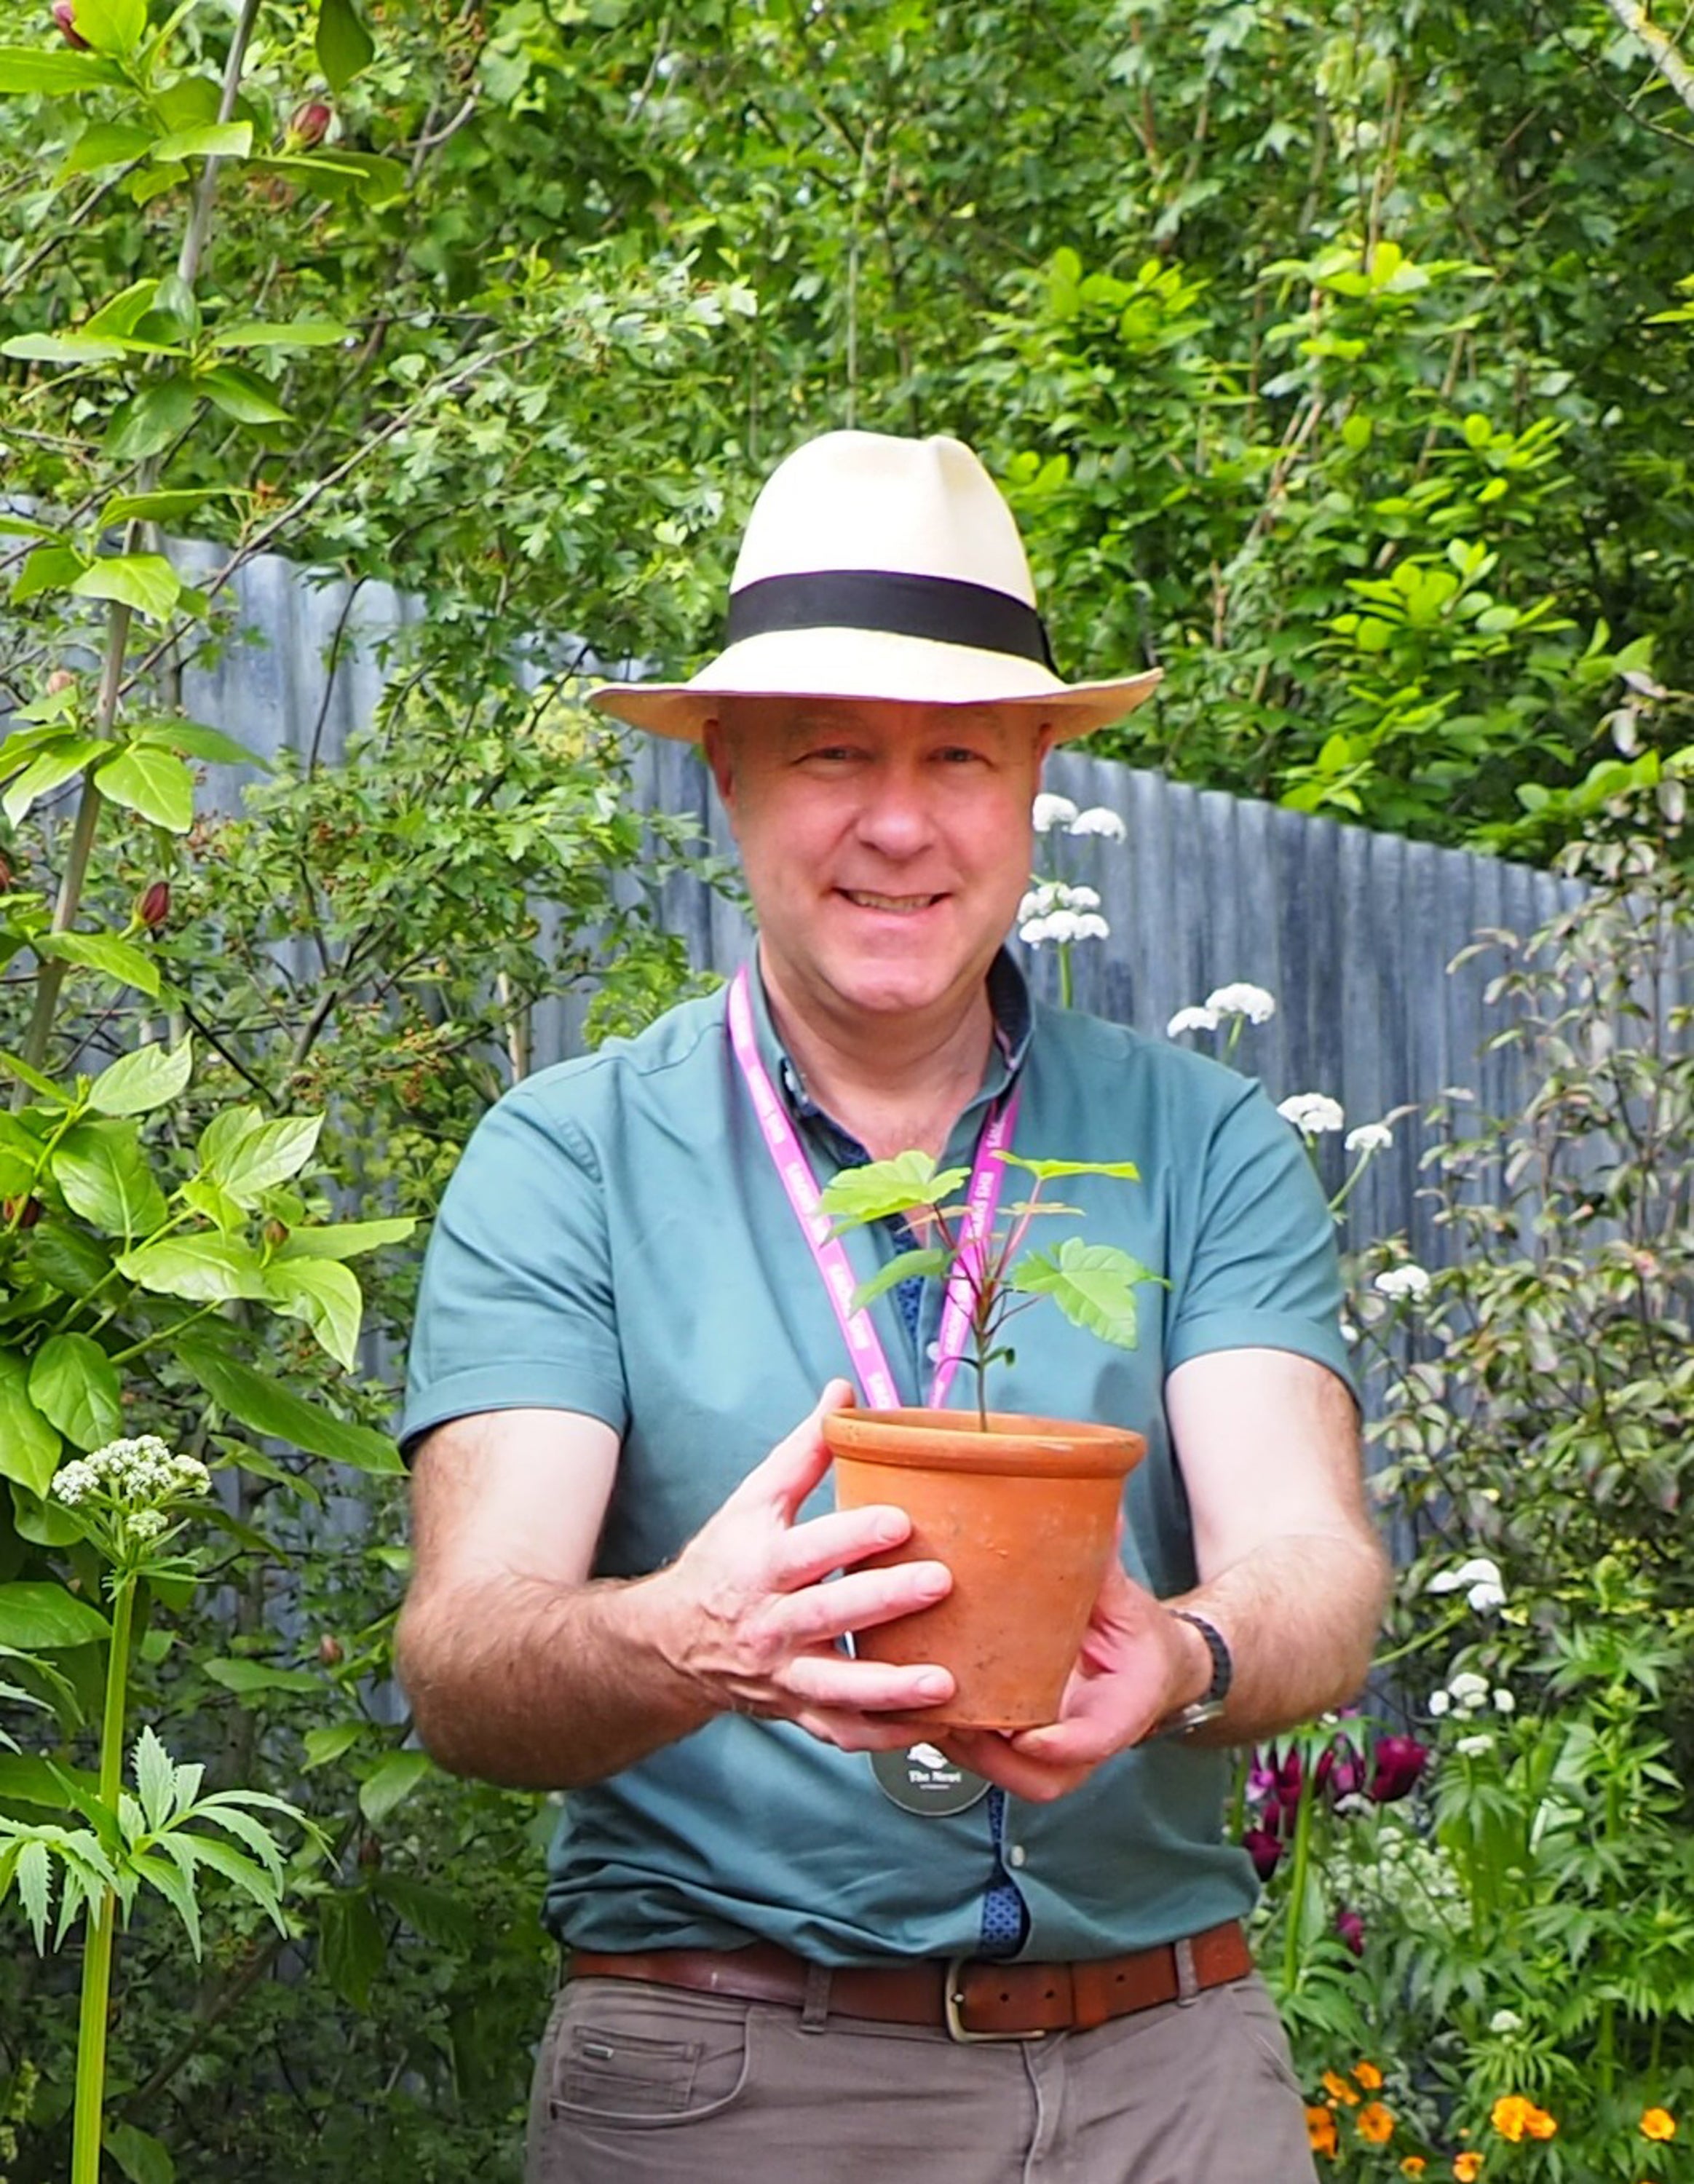 Director of Gardens and Parklands at the National Trust, Andy Jasper, with the first Sycamore Gap seedling at the Chelsea Flower Show last week